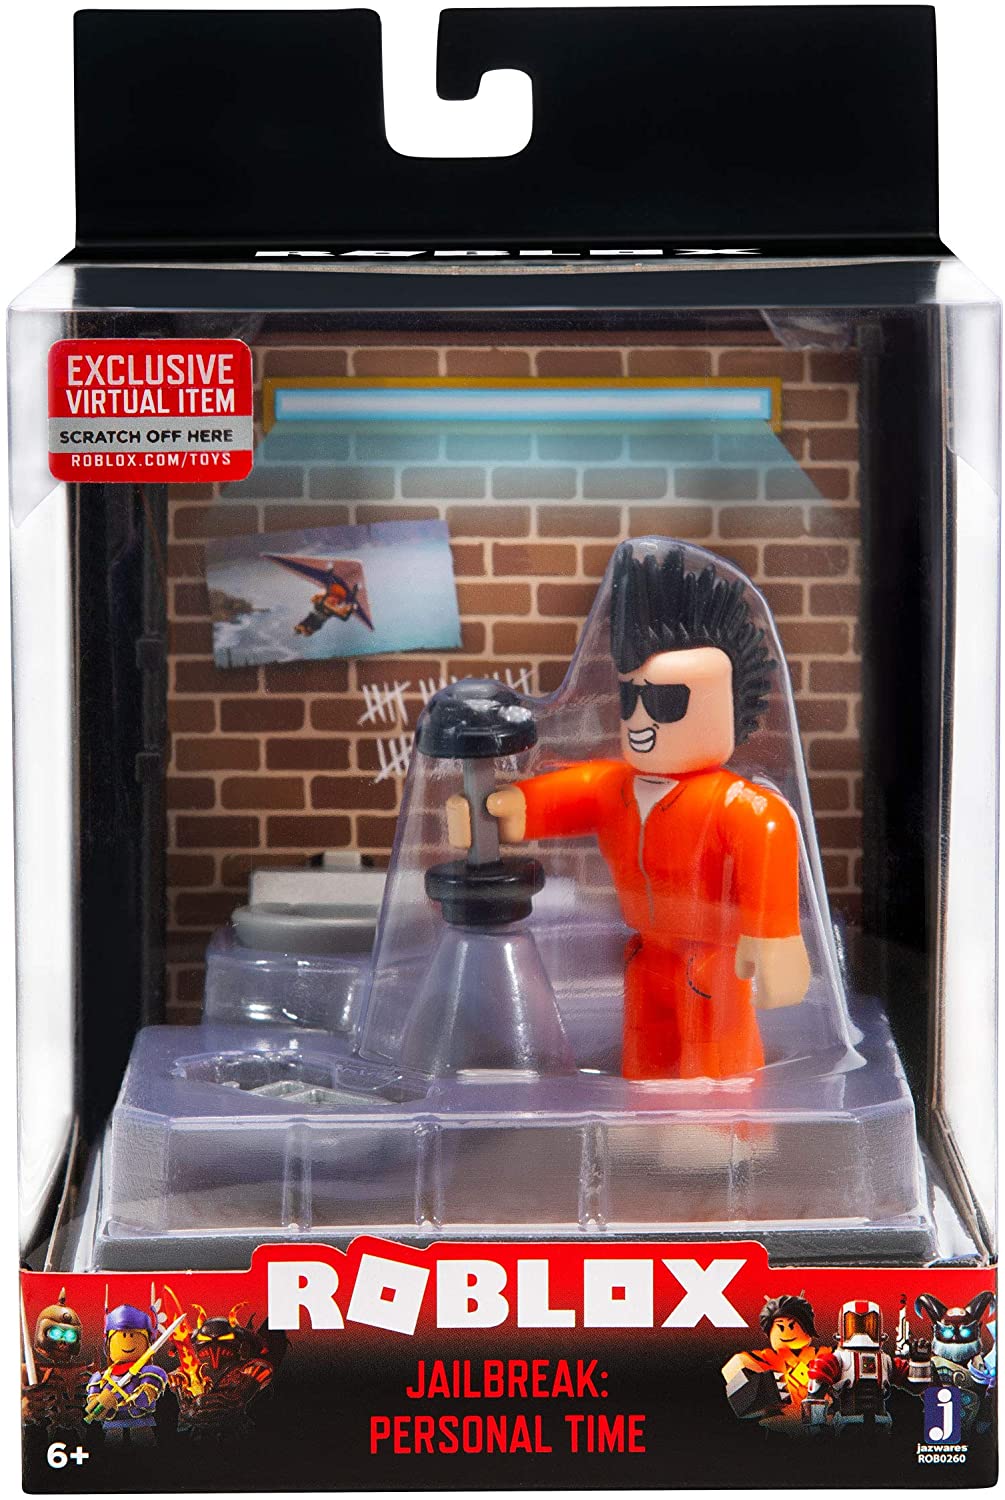 Roblox Action Collection - Jailbreak Action Figures Toy  - Assortment Styles